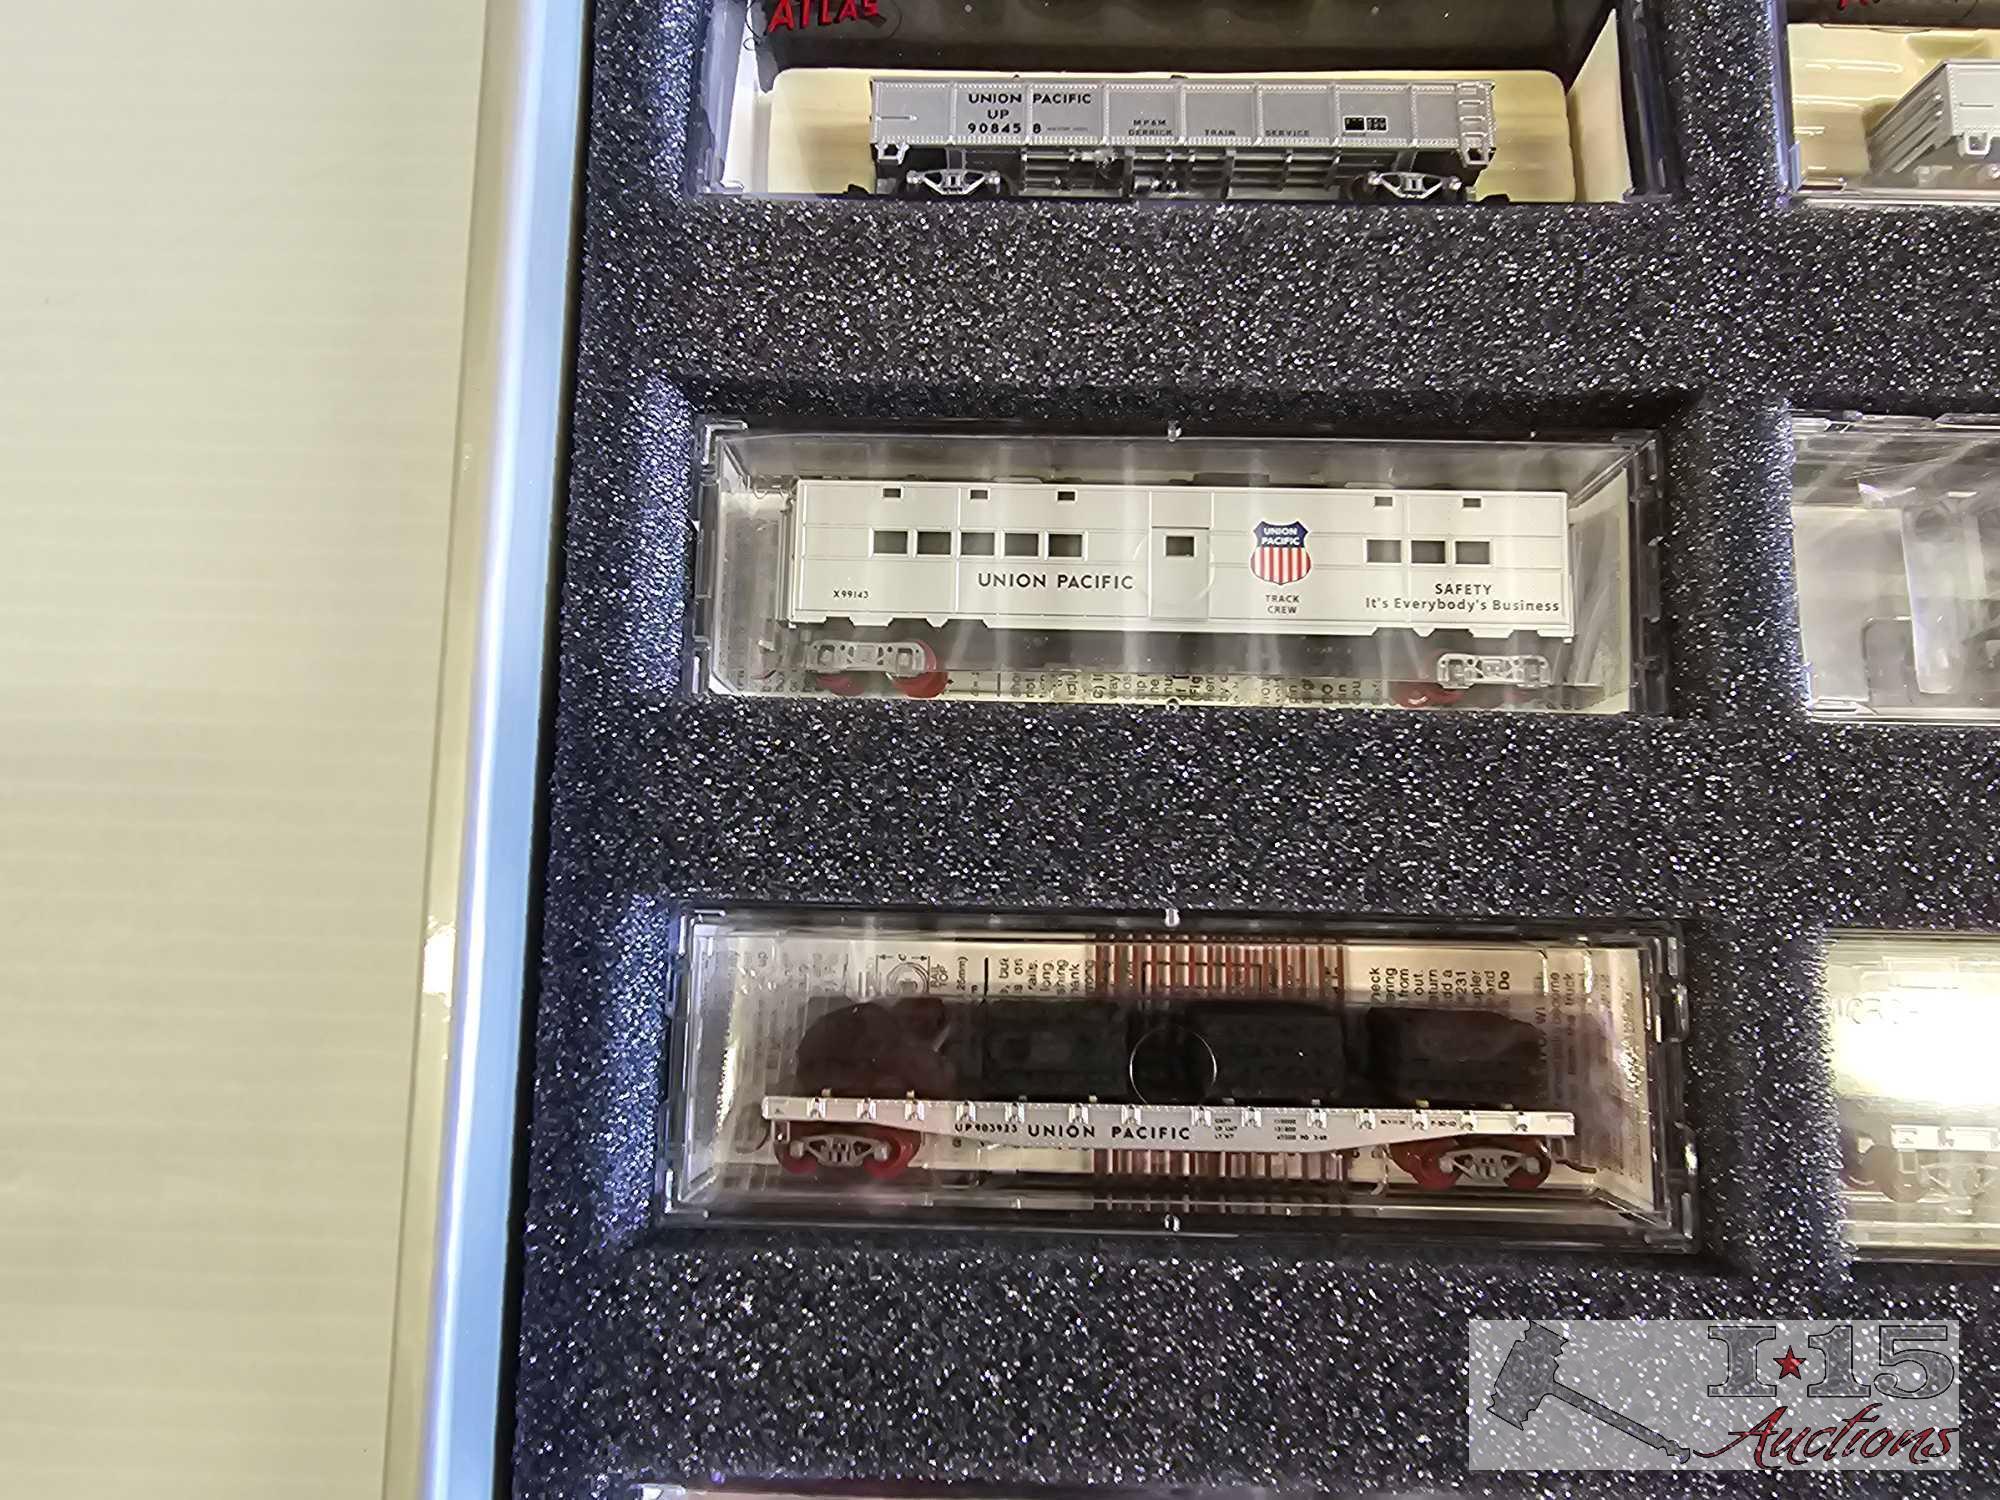 The N-Scale Collector Multi-Manufacturer Union Pacific MOW Track Repair Train Set